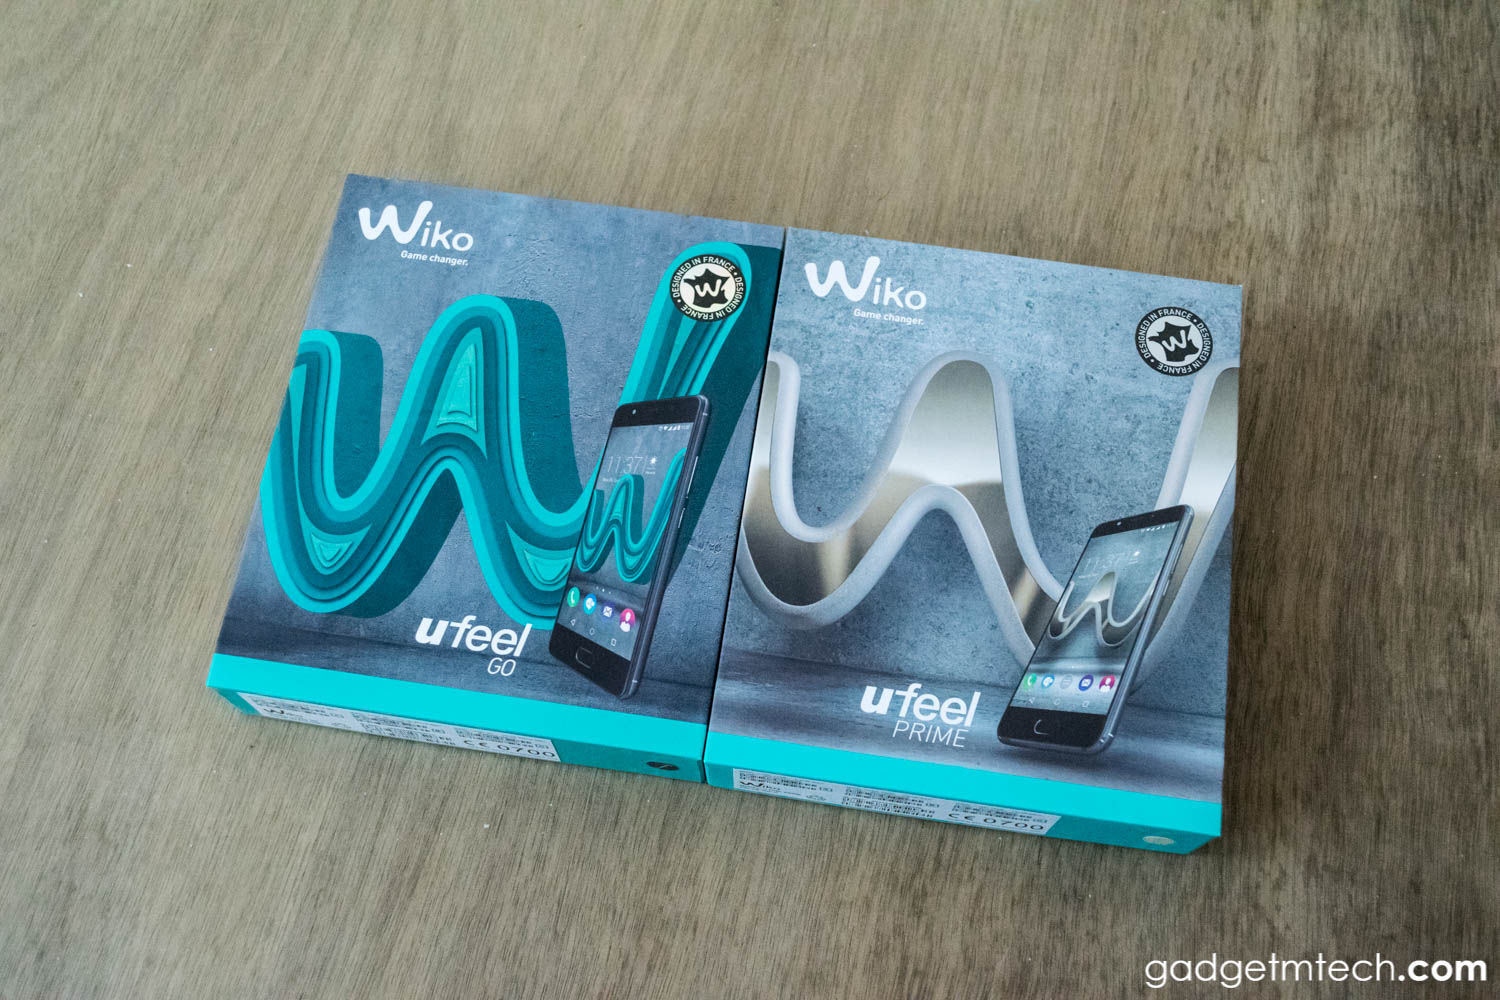 Unboxing & First Impressions: Wiko Ufeel Go and Ufeel Prime